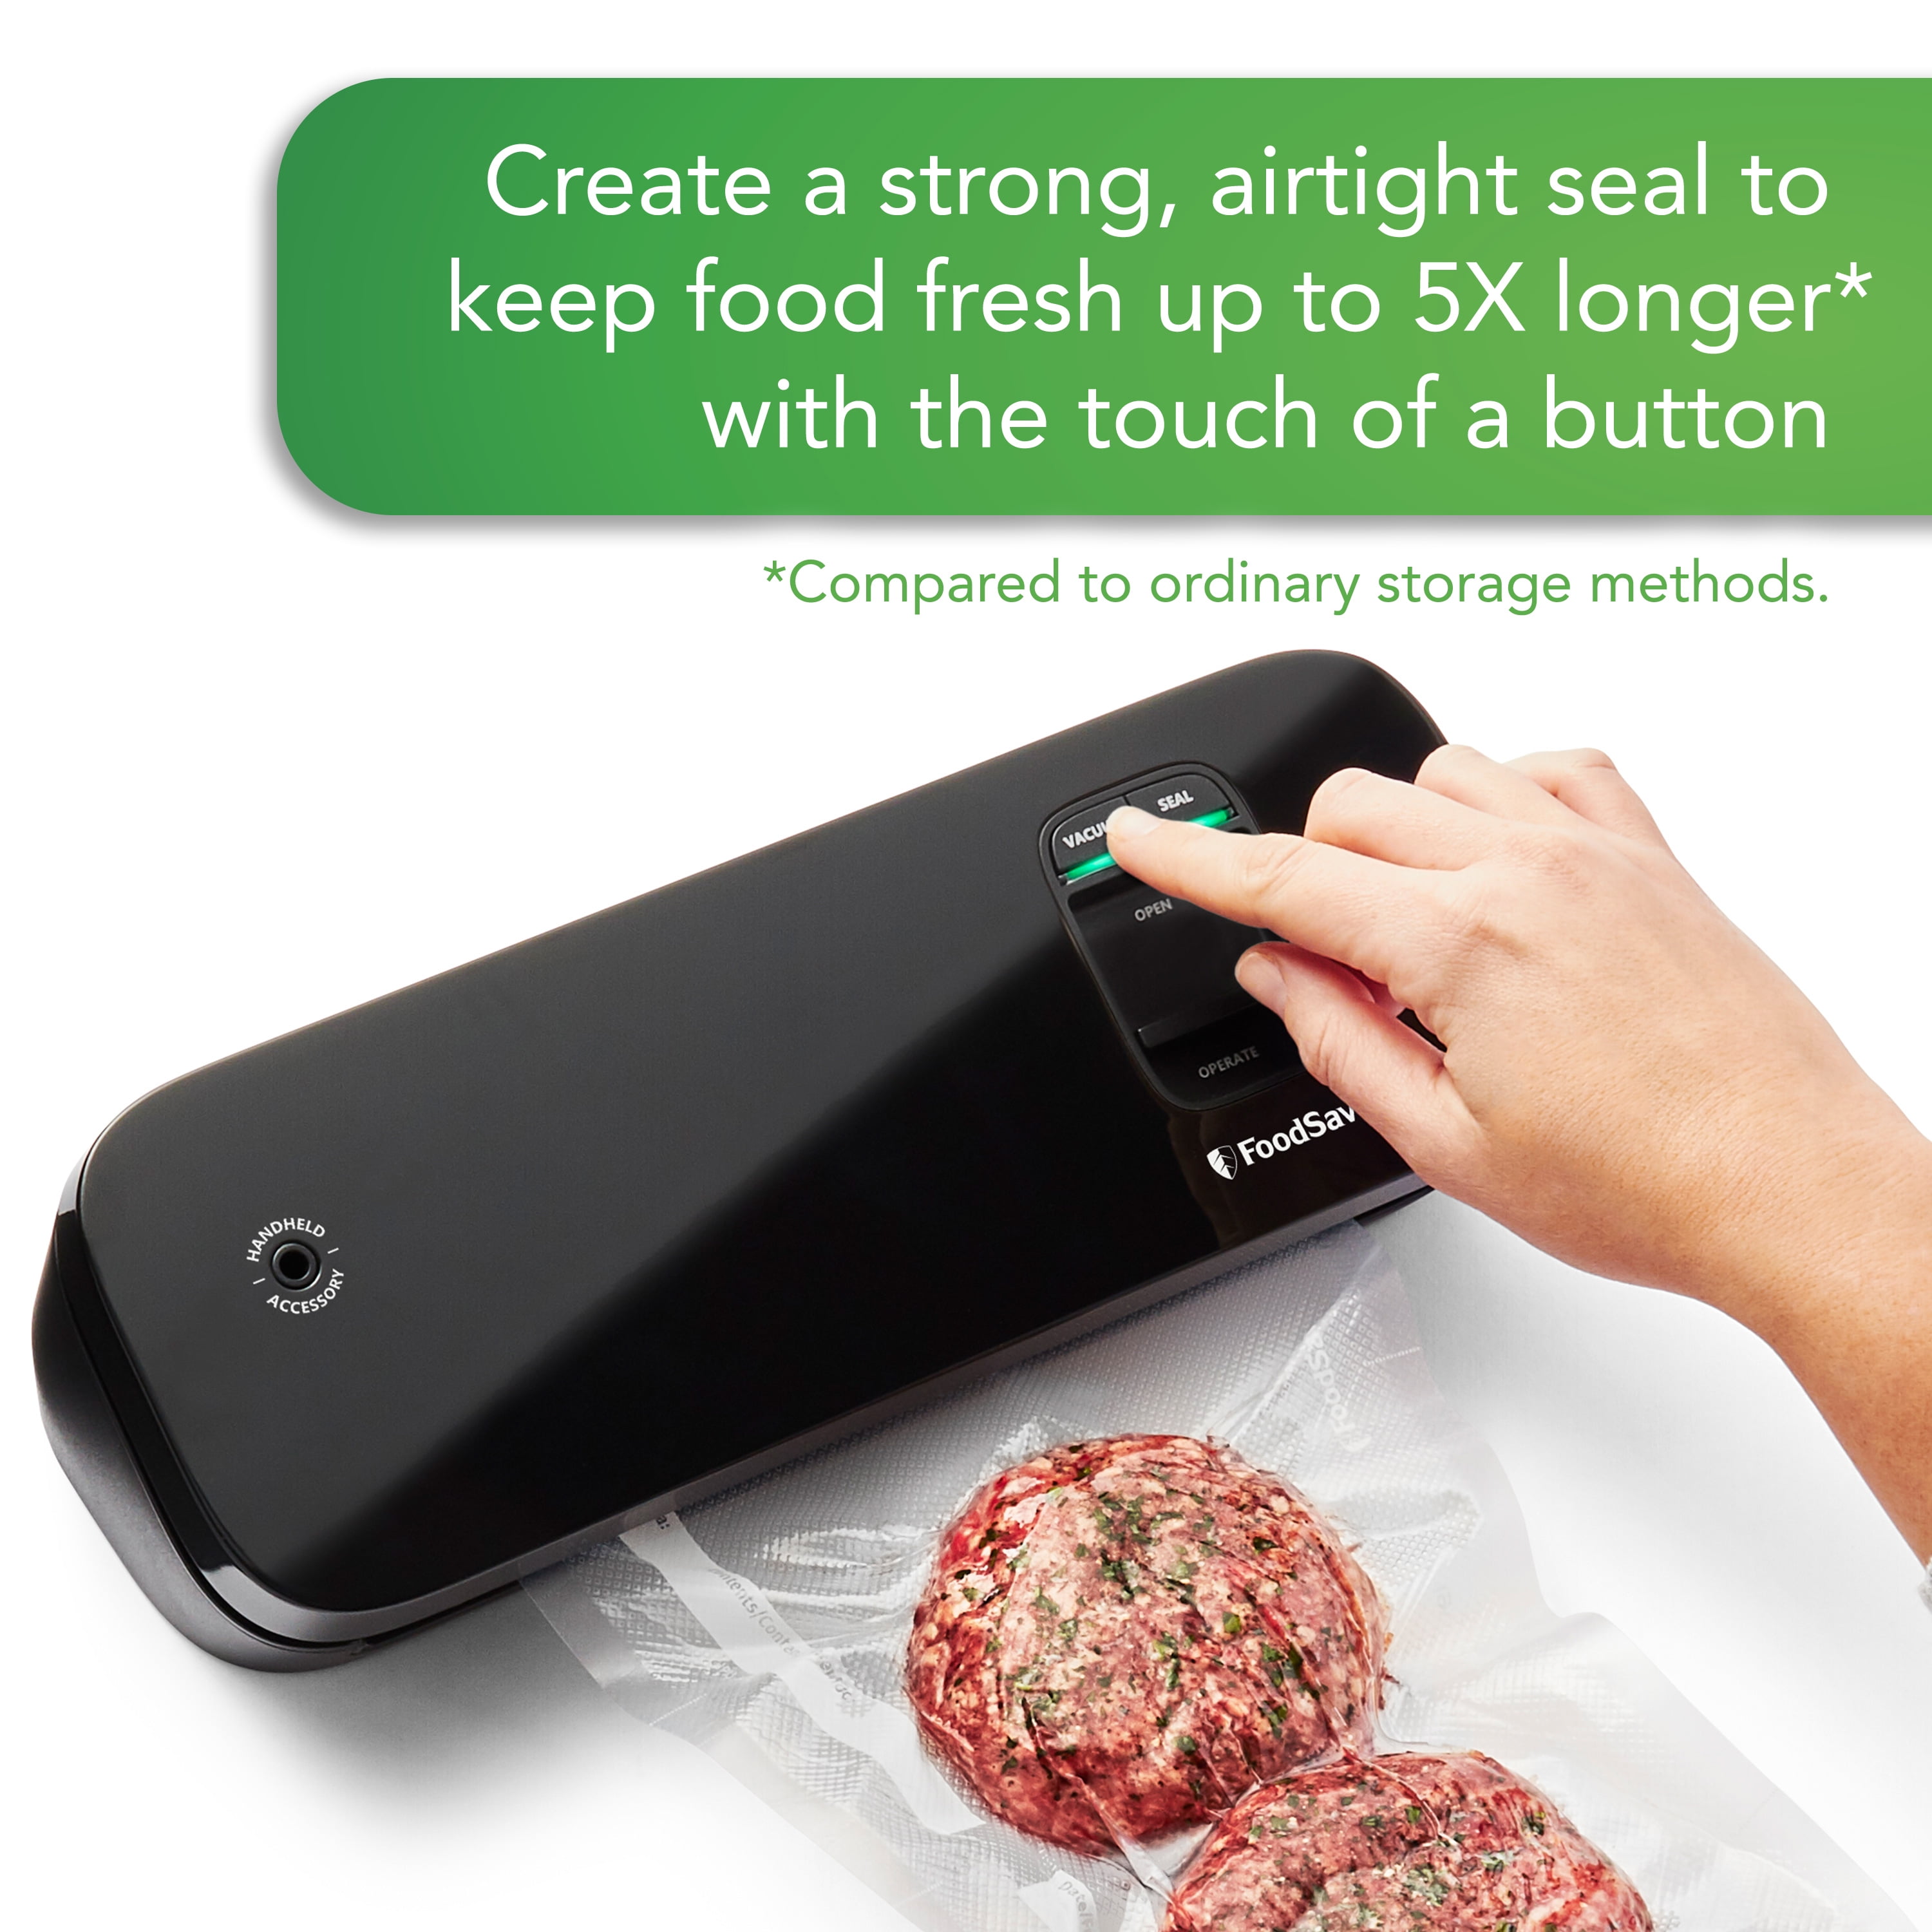 New FoodSaver® Compact Vacuum Sealer Delivers Full-Sized Power in a Modern  Design that Saves 30% More Space in the Kitchen